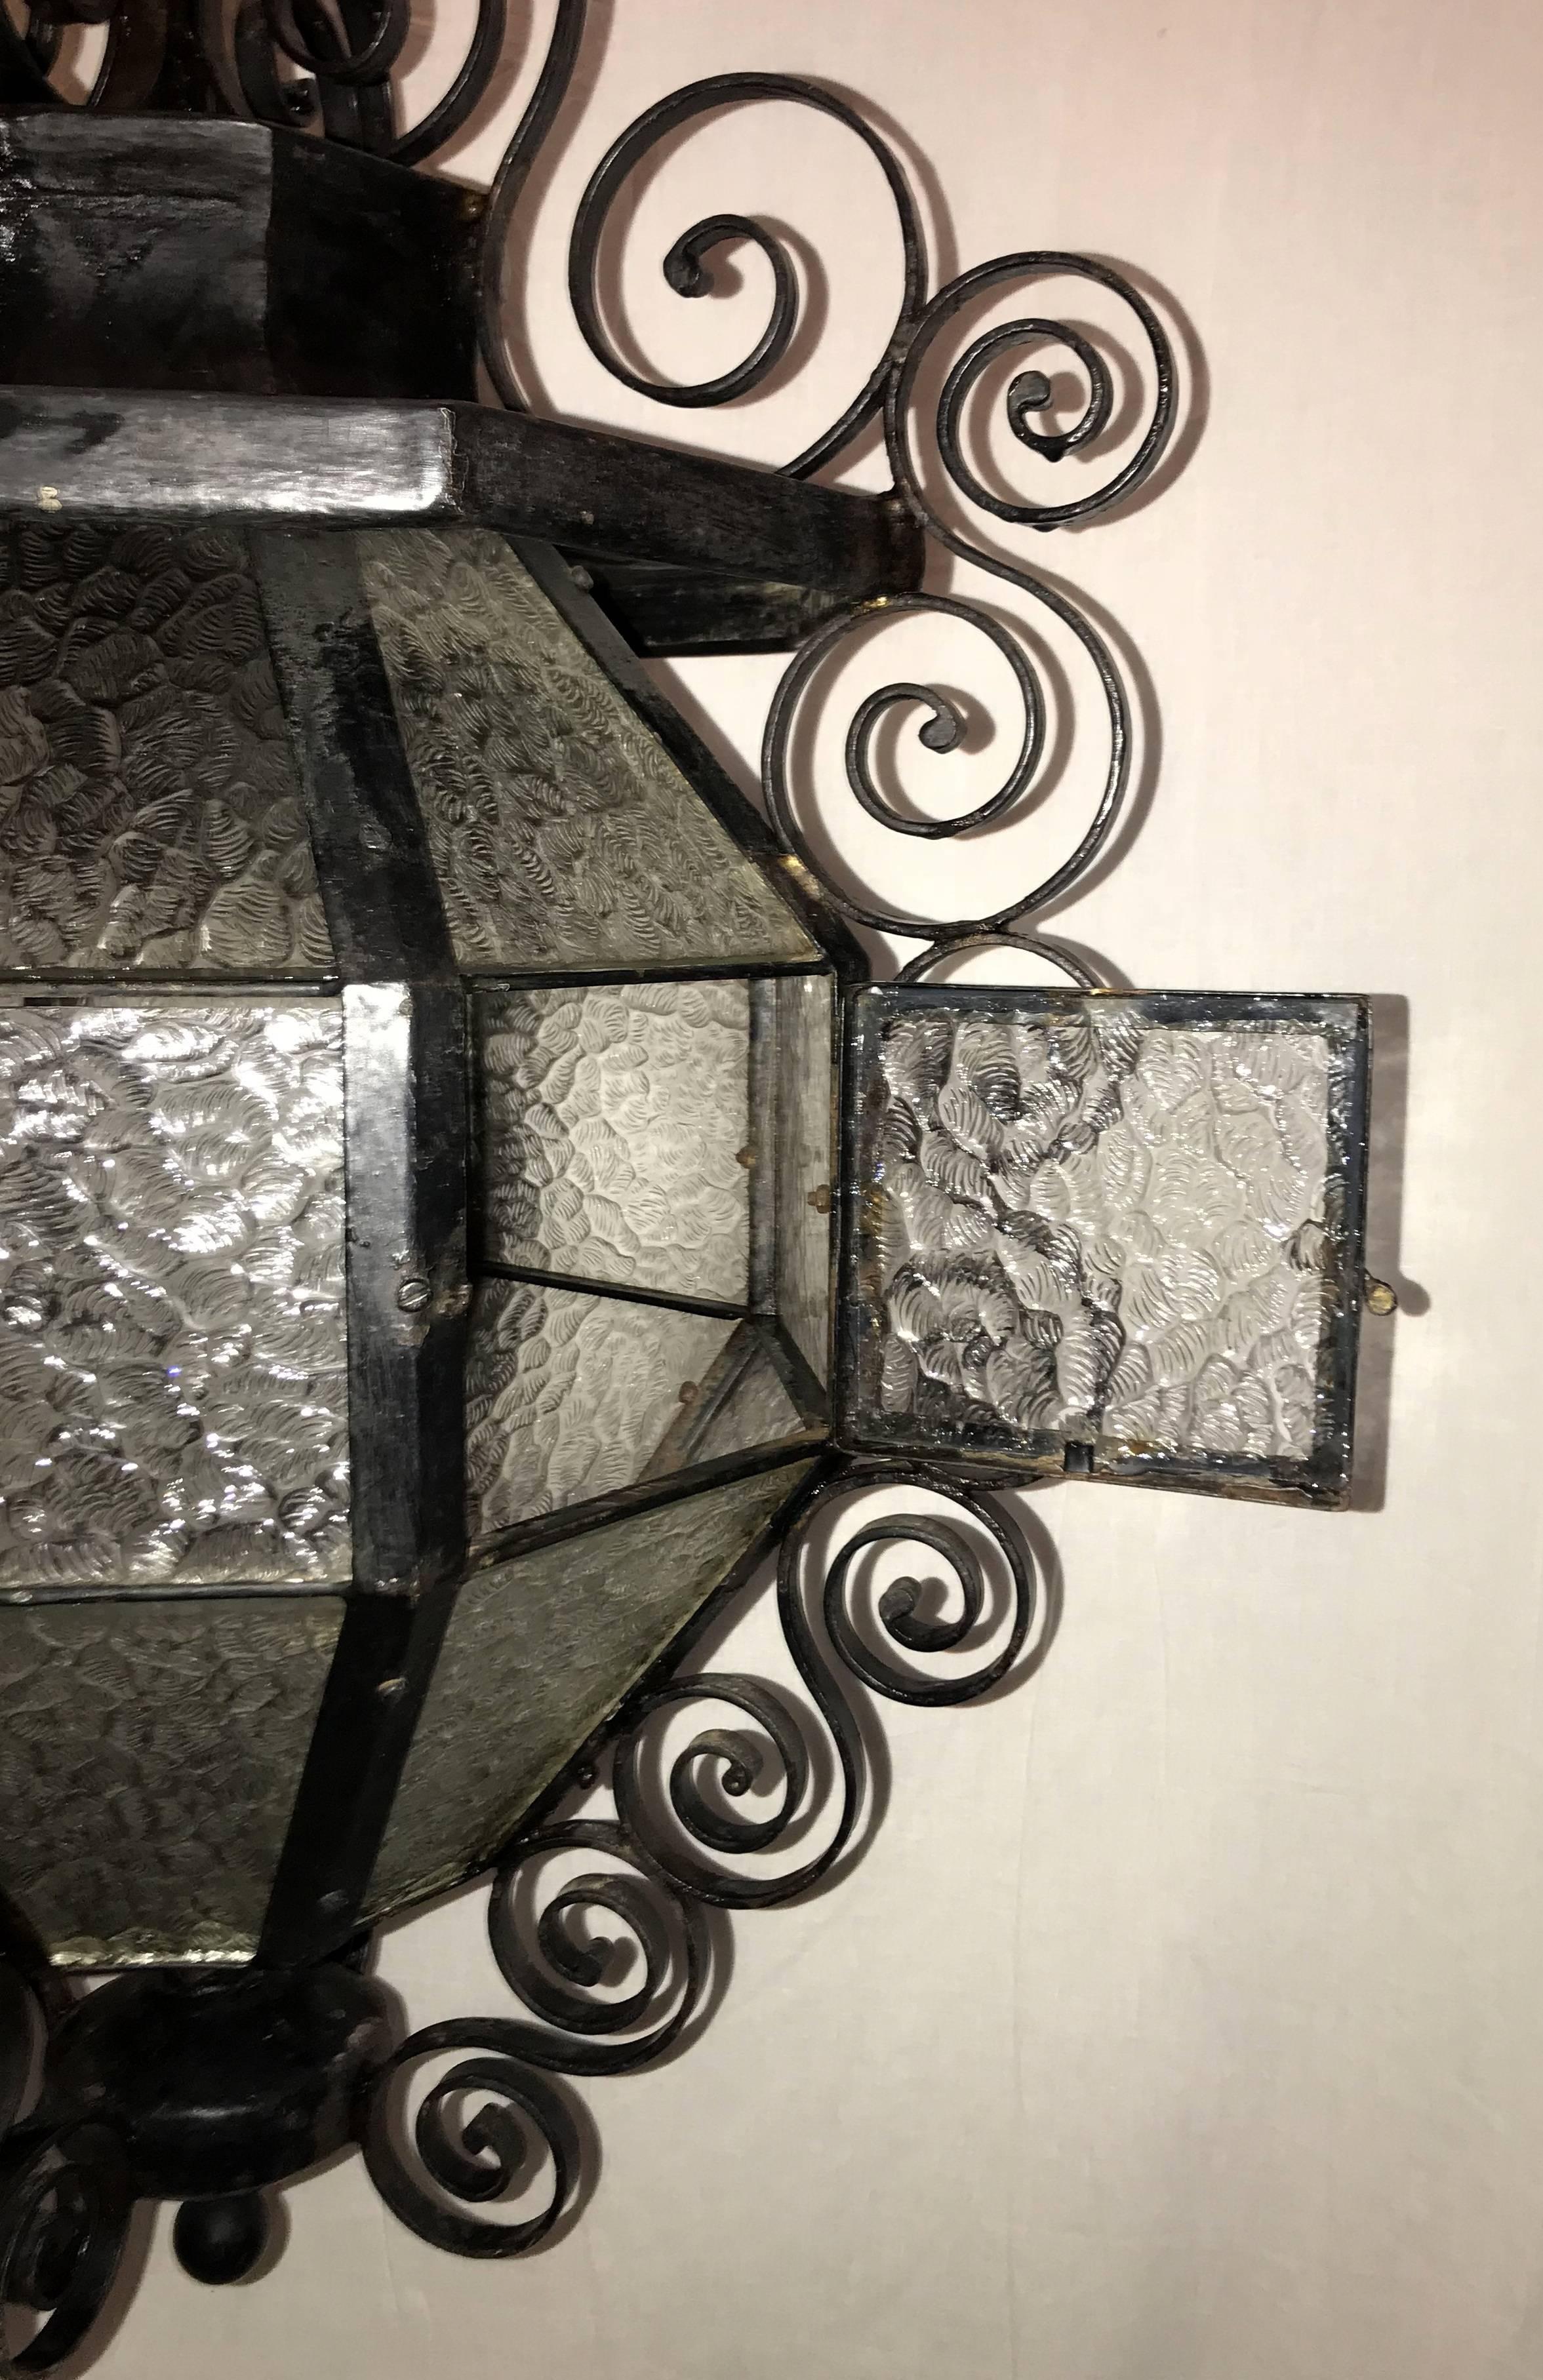 Mid-20th Century Pair of French Iron Art Nouveau Glass Panel Lantern Pendent Light Fixture For Sale